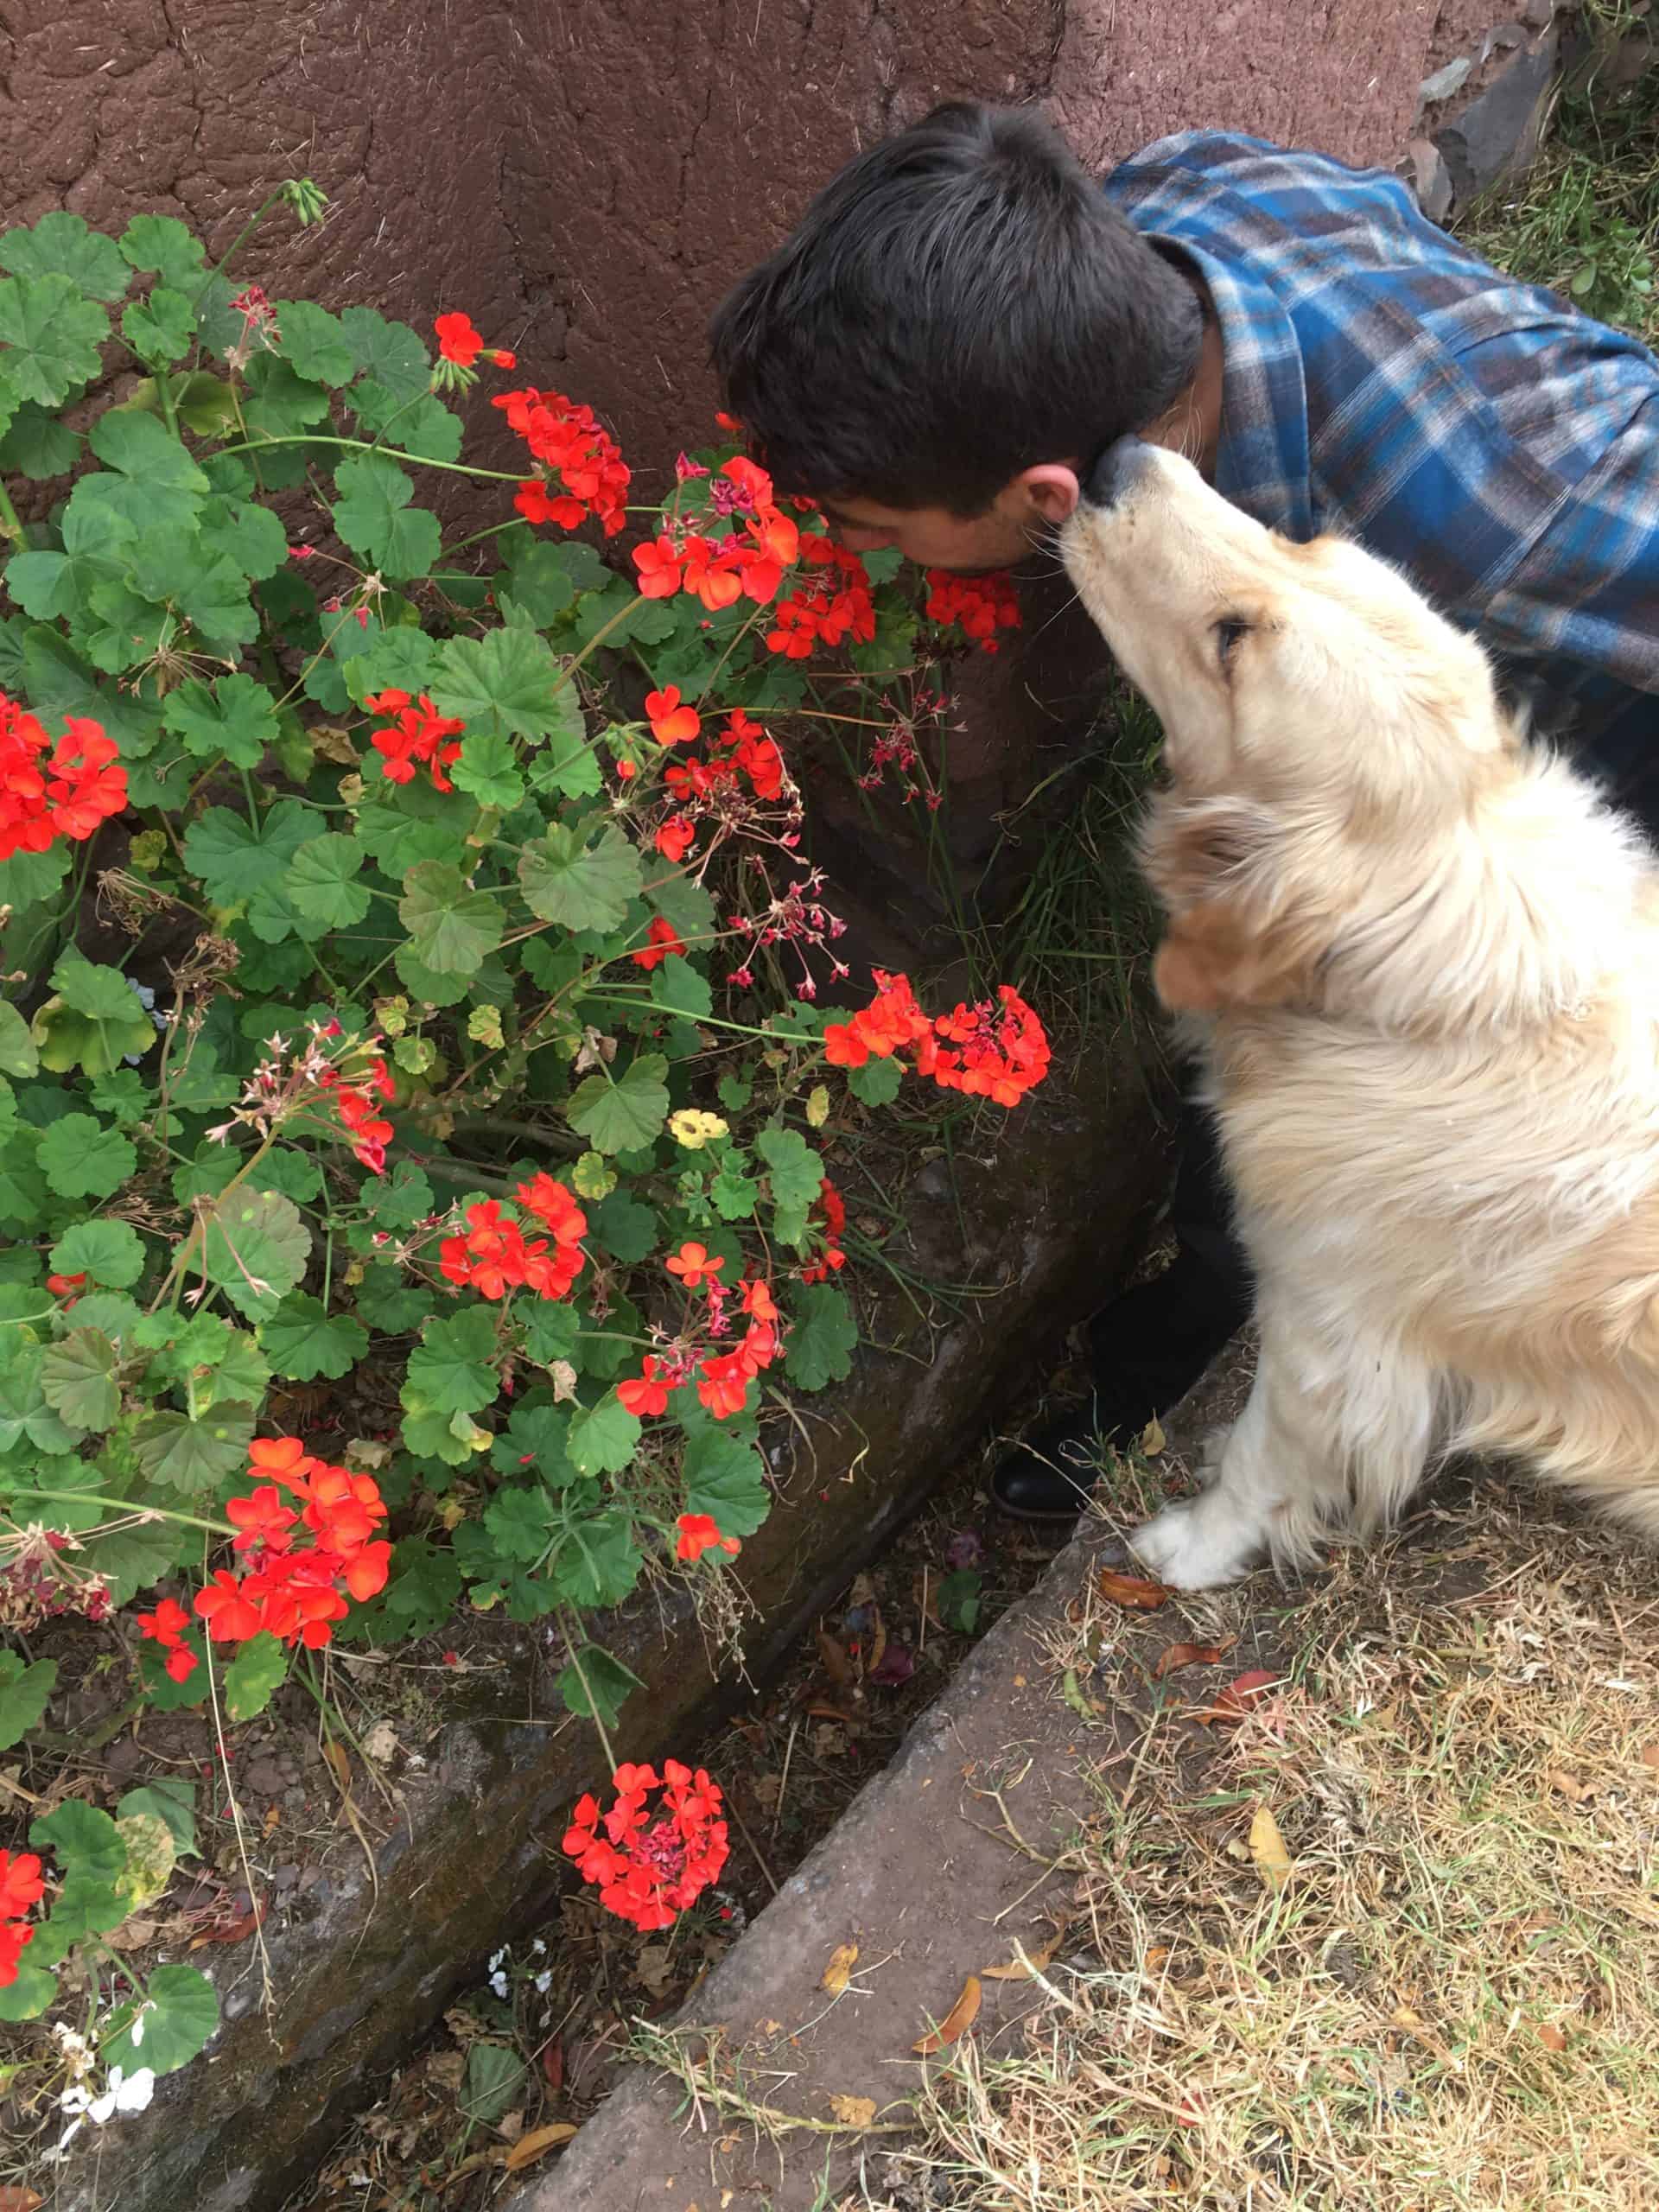 The author stopping to smell the flowers while his dog stops to smell him.